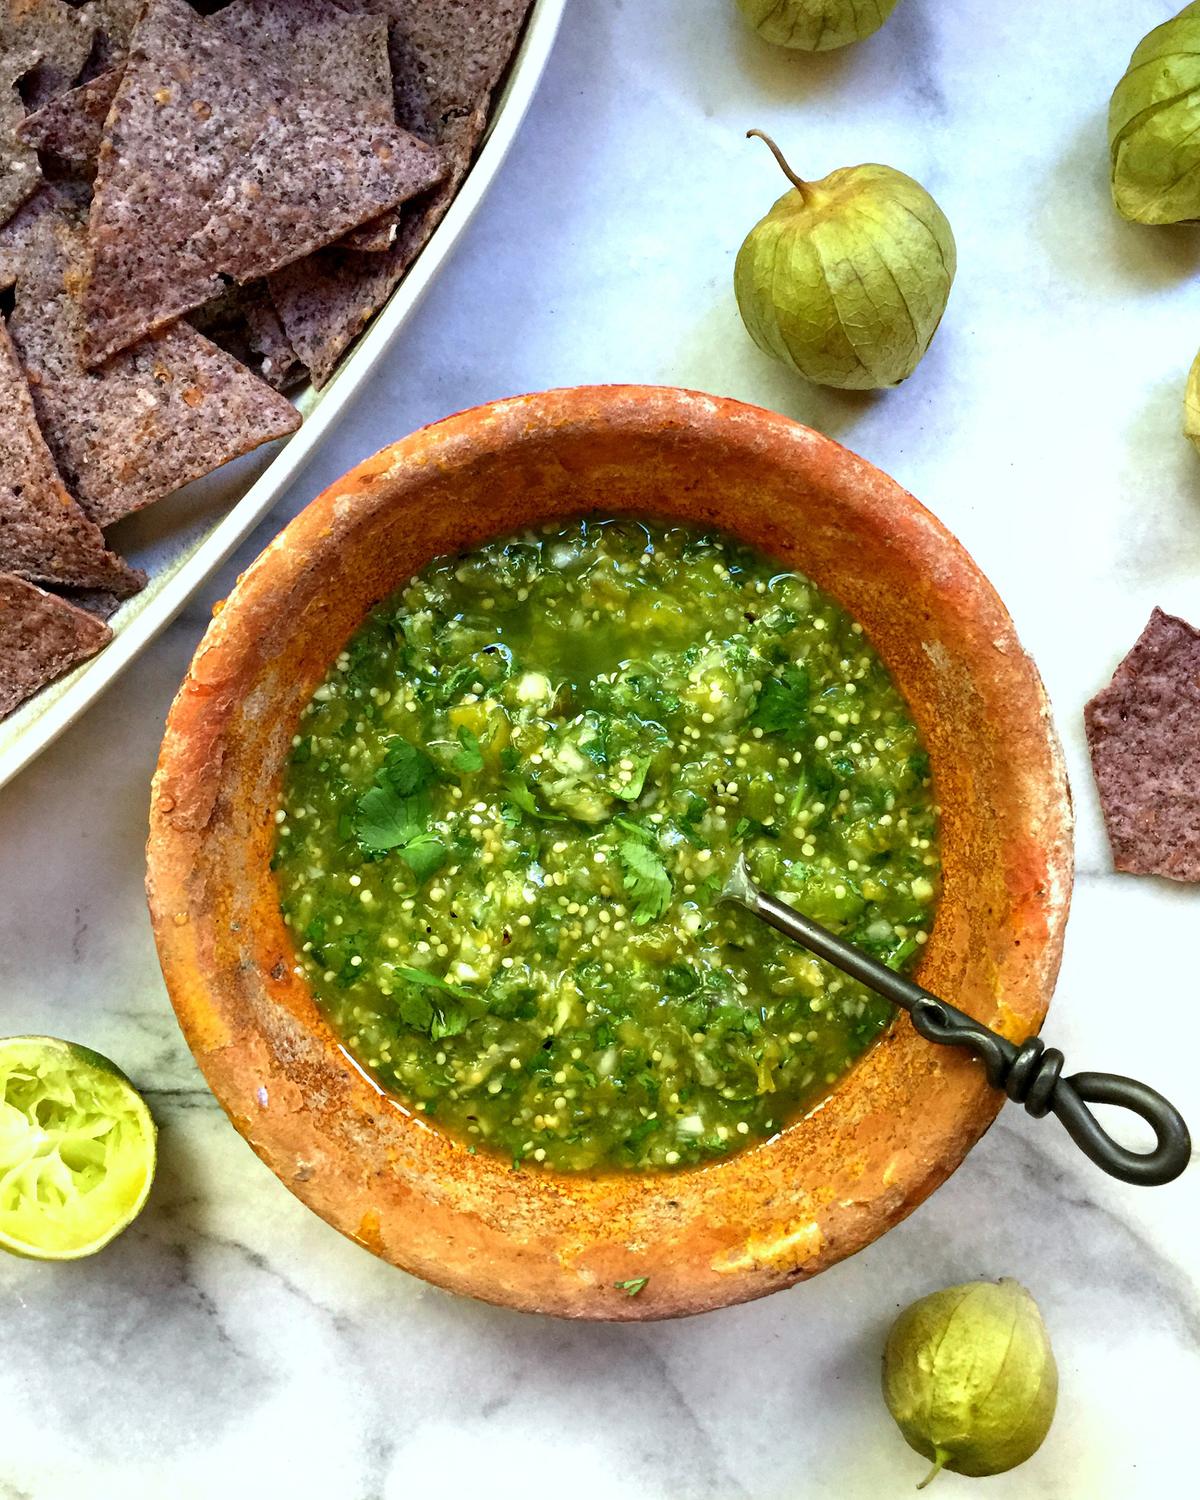 Tart and vegetal with a hint of fruit, tomatillos add pucker-y brightness to salsas and stews. (Lynda Balslev for TasteFood)